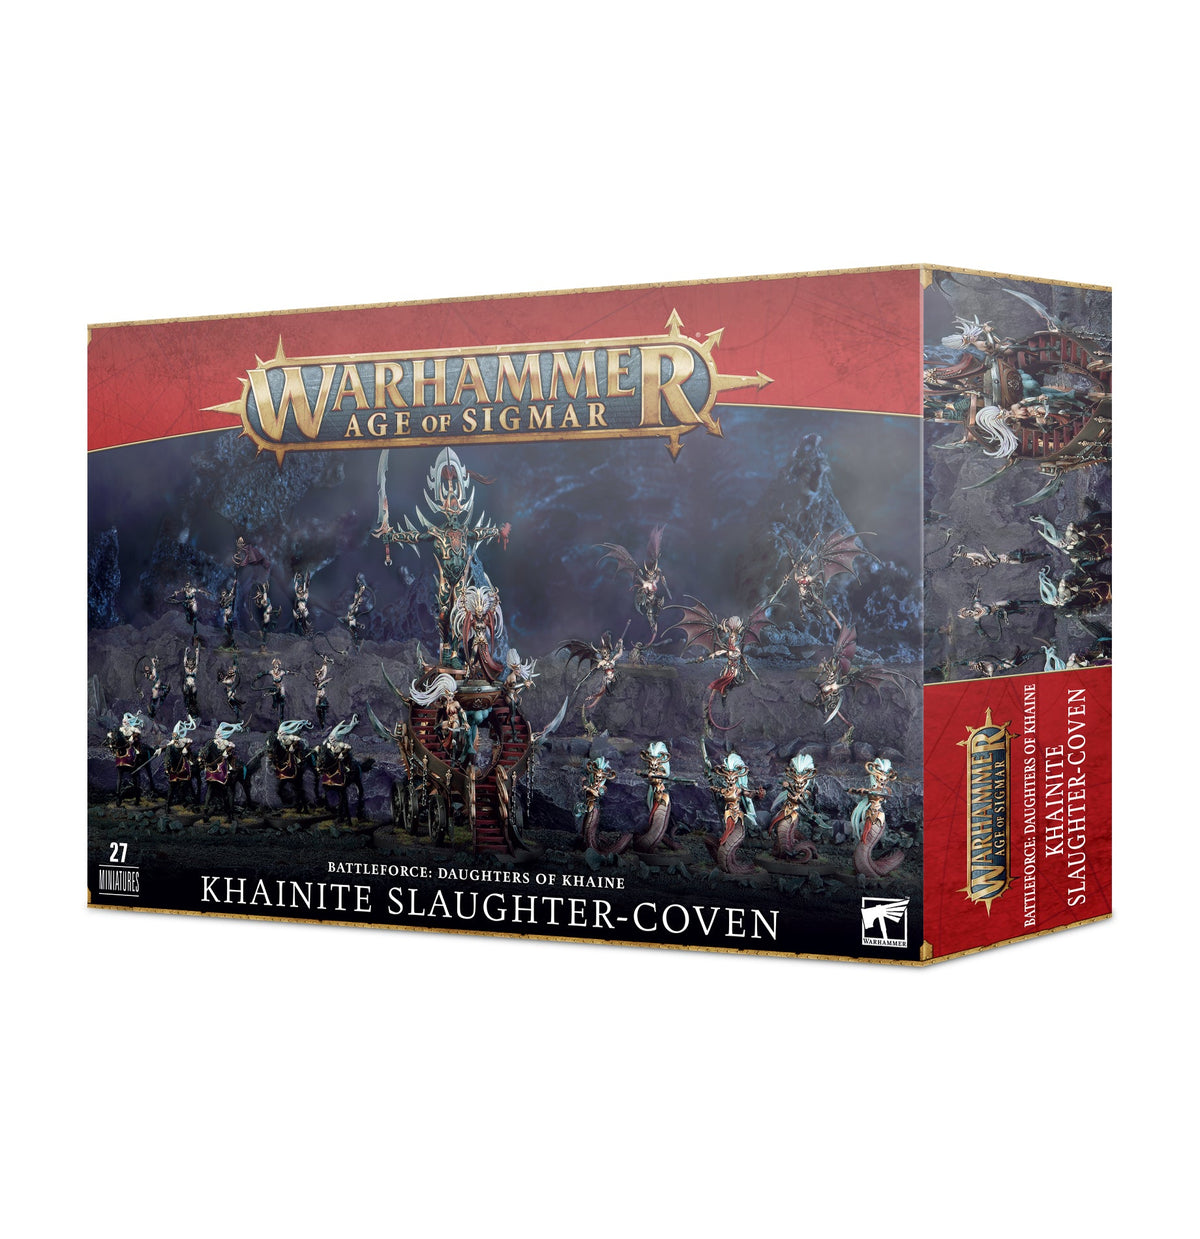 Daughters of Khaine - Battleforce: Khainite Slaughter-Coven (Warhammer Age of Sigmar)